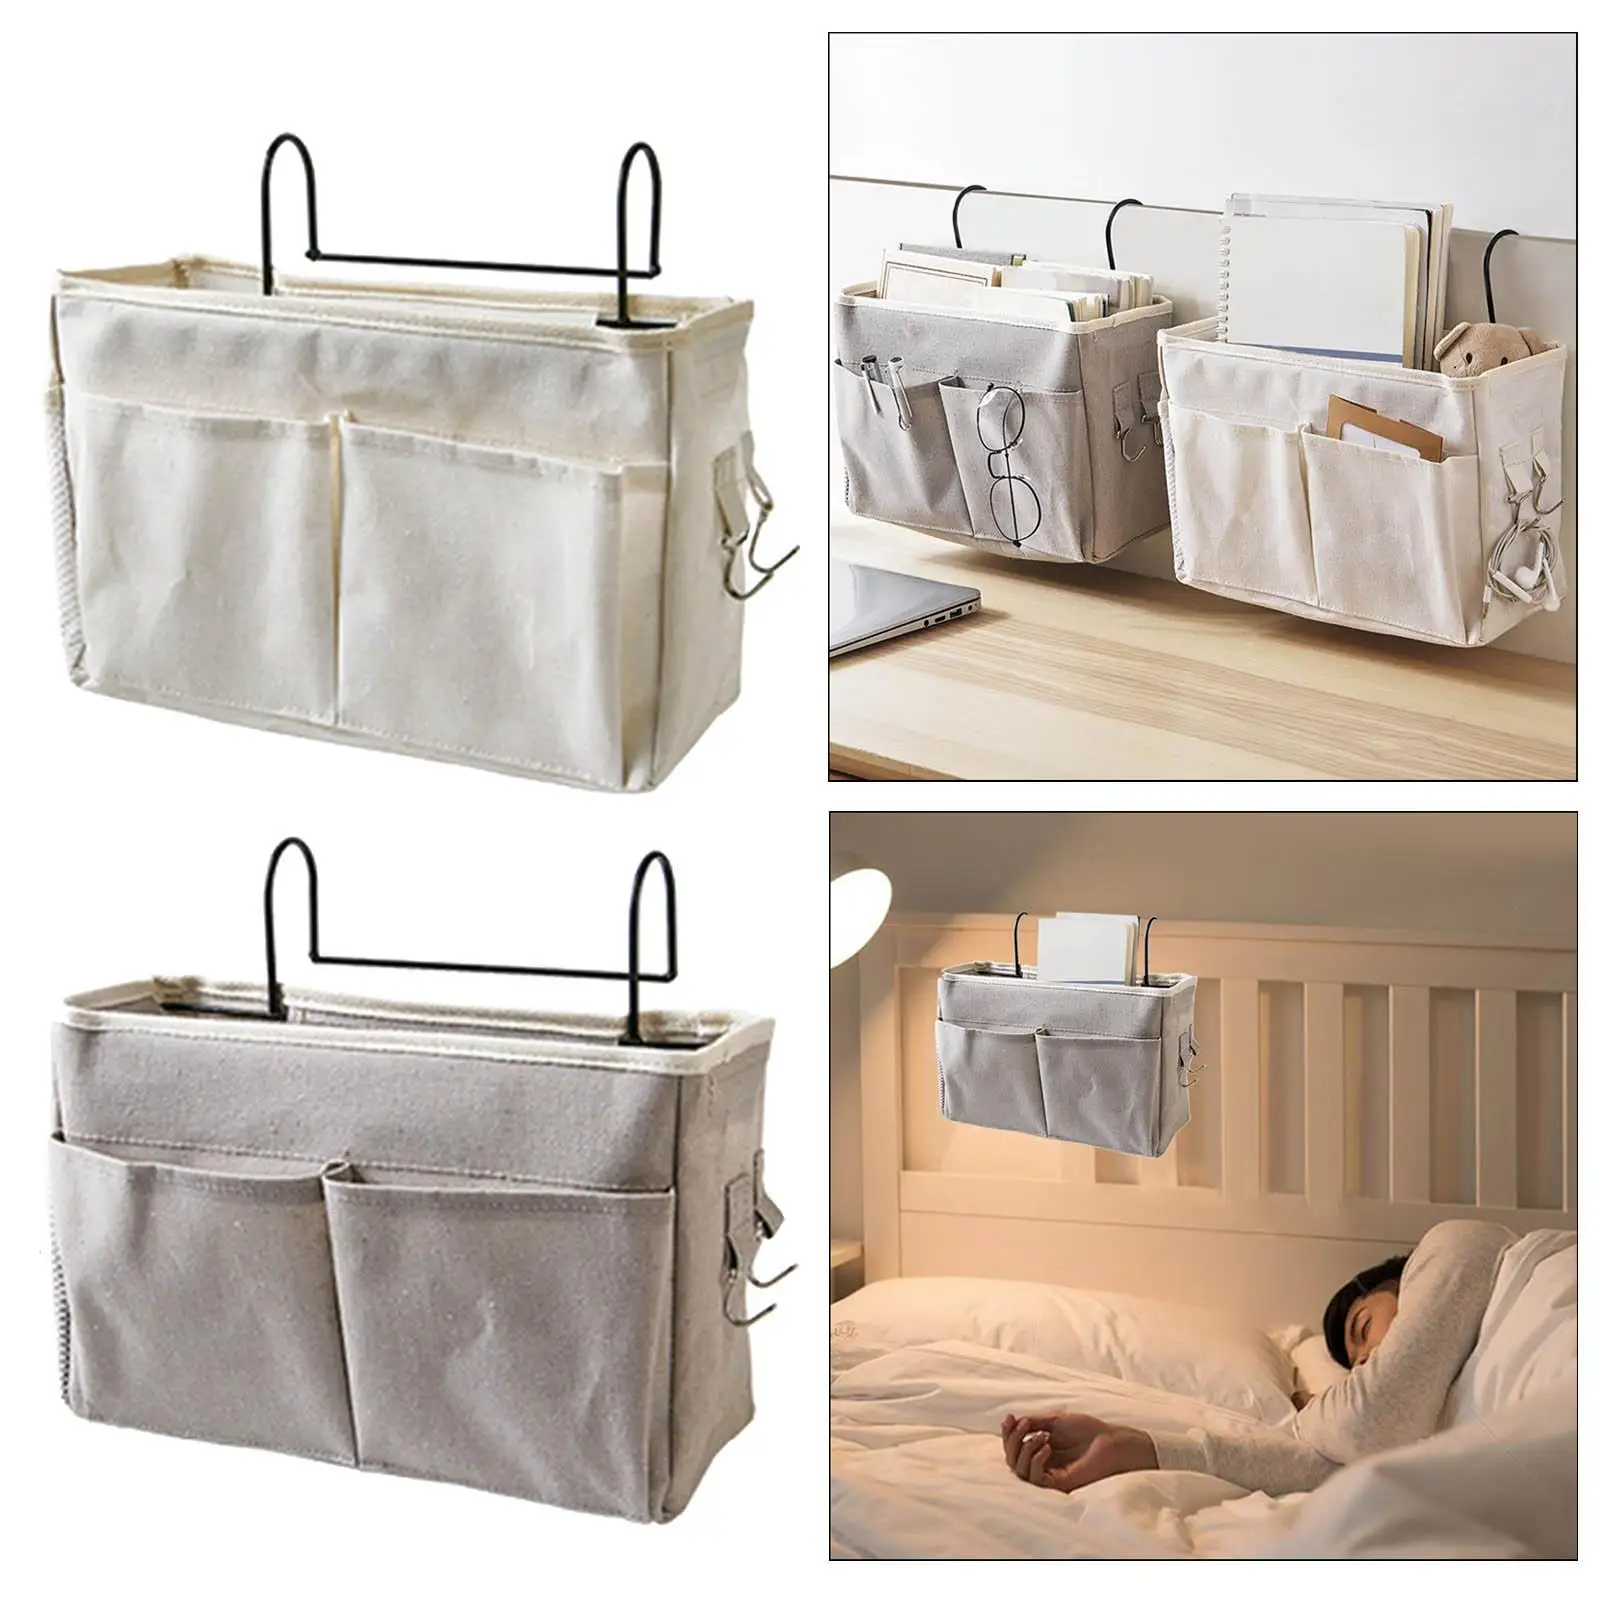 Bedside Caddy with 2 Hooks Hanging Organizer for Dorms TV Remote Control Magazine Bedside Handrail Pockets Baby Crib Bag